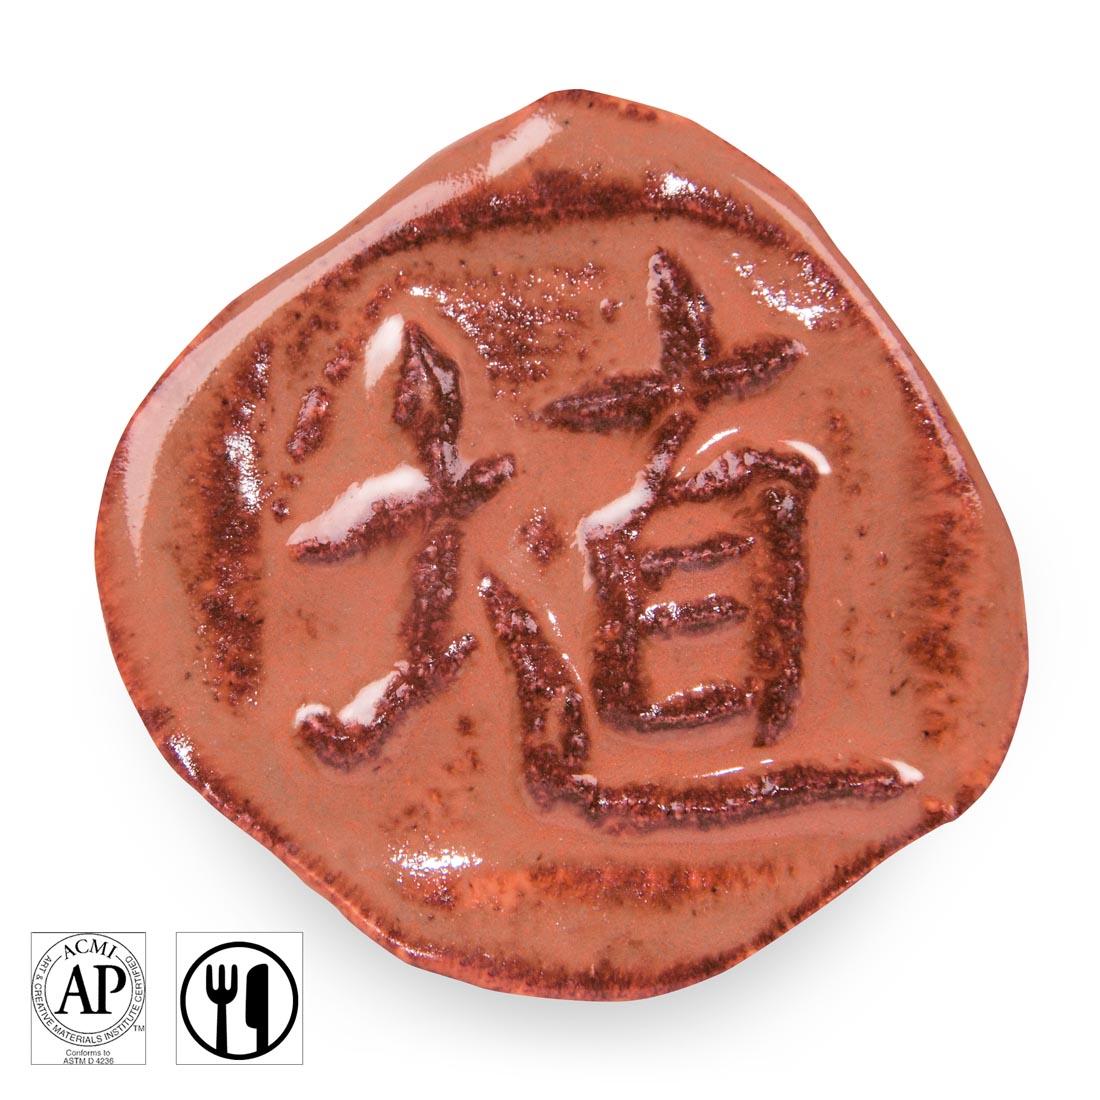 clay chip with Hibiscus Gloss AMACO Shino High Fire Glaze applied; symbols for AP Seal and food safe